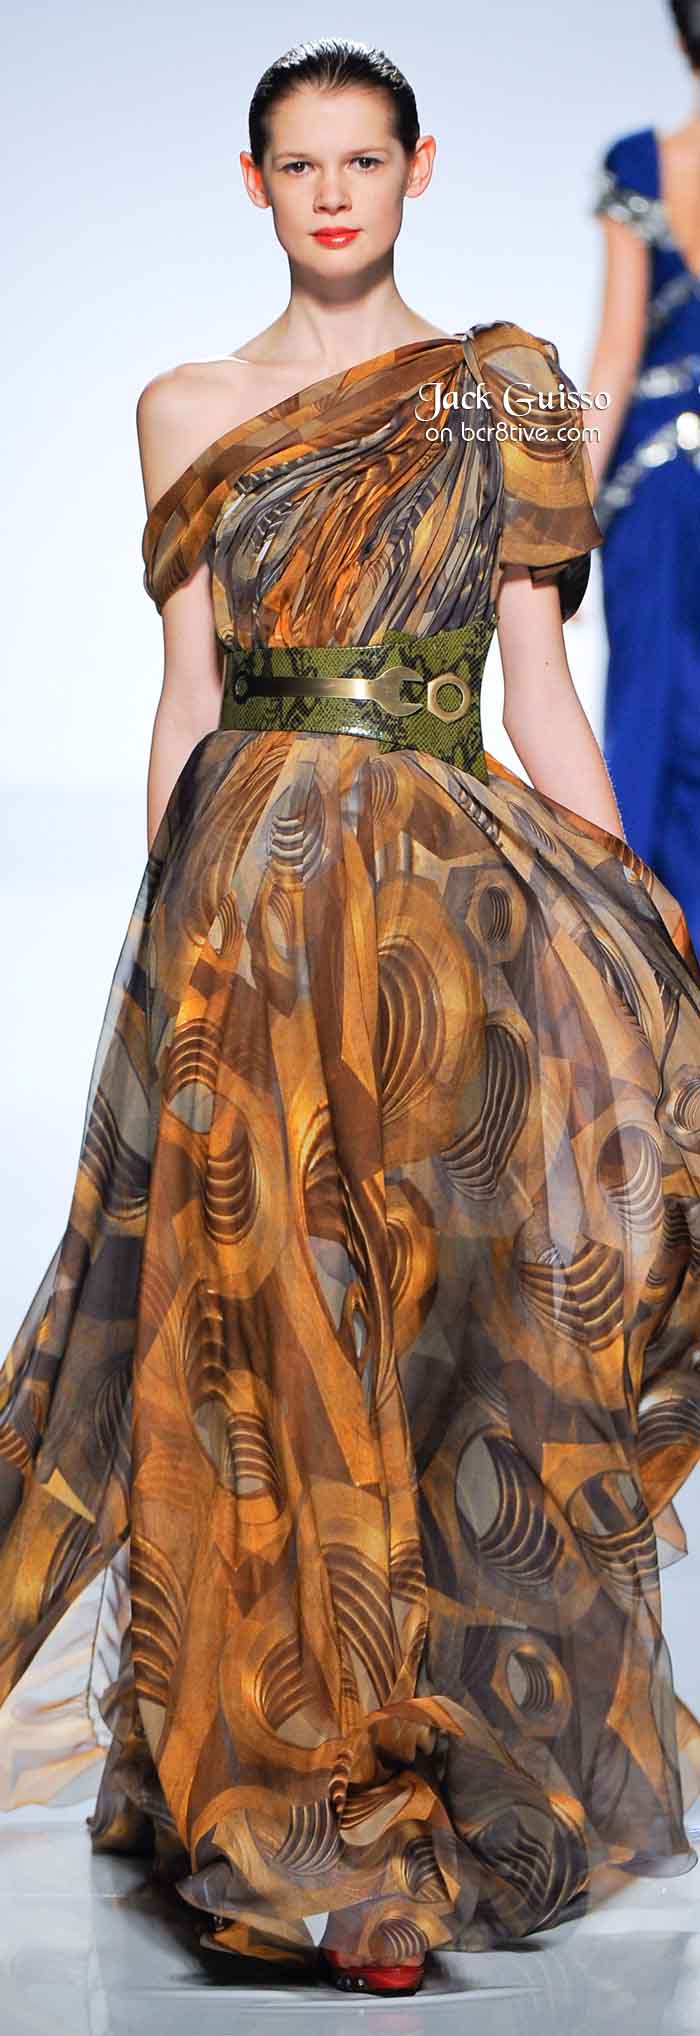 Jack Guisso Spring 2011 Couture